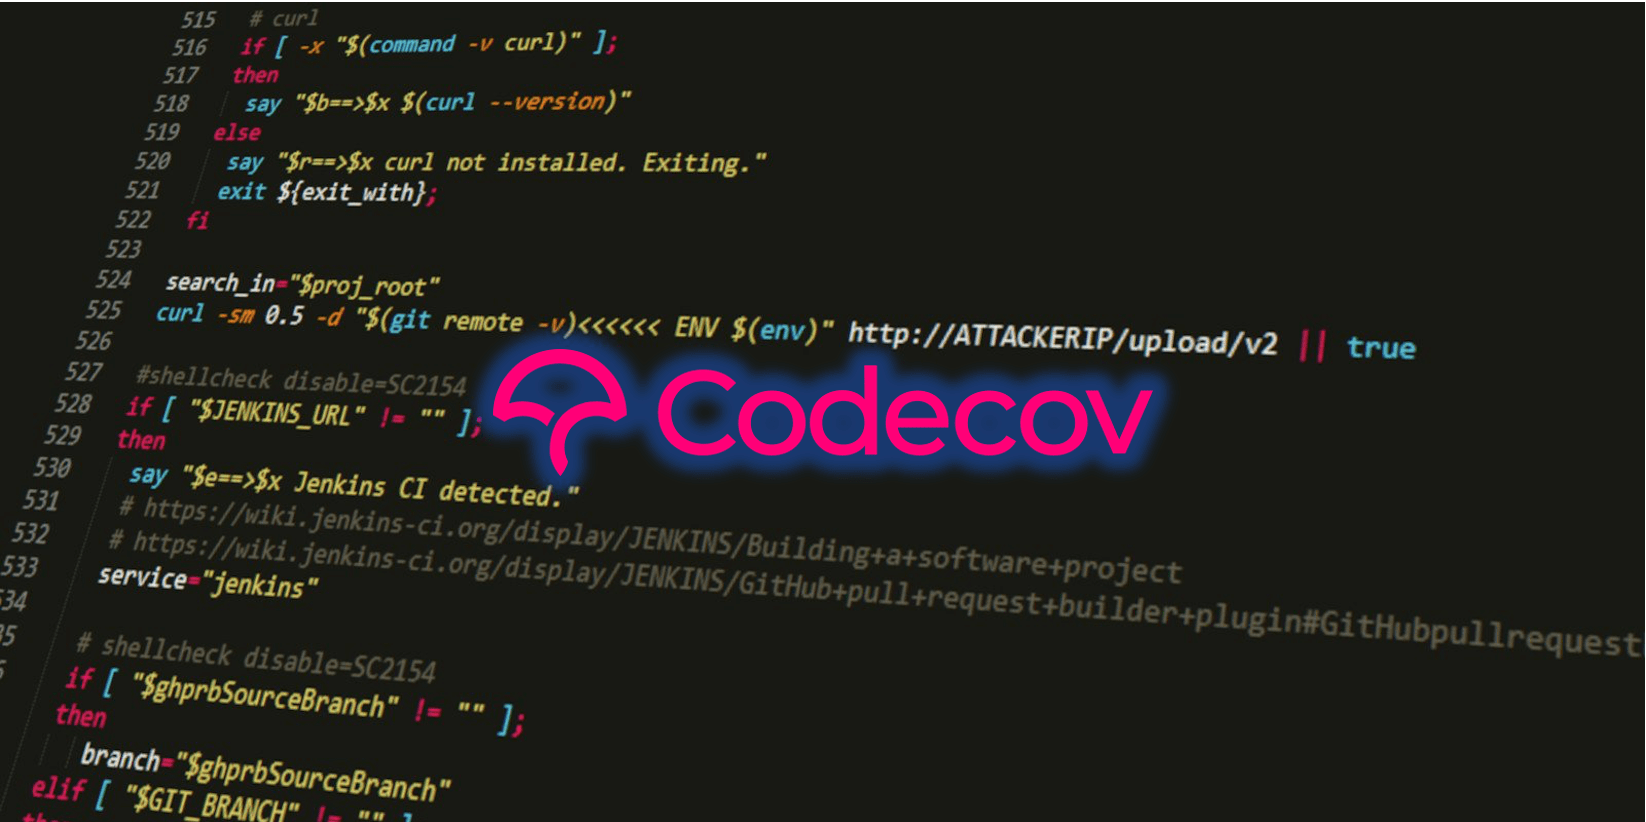 Hundreds of networks reportedly hacked in Codecov supply-chain attack